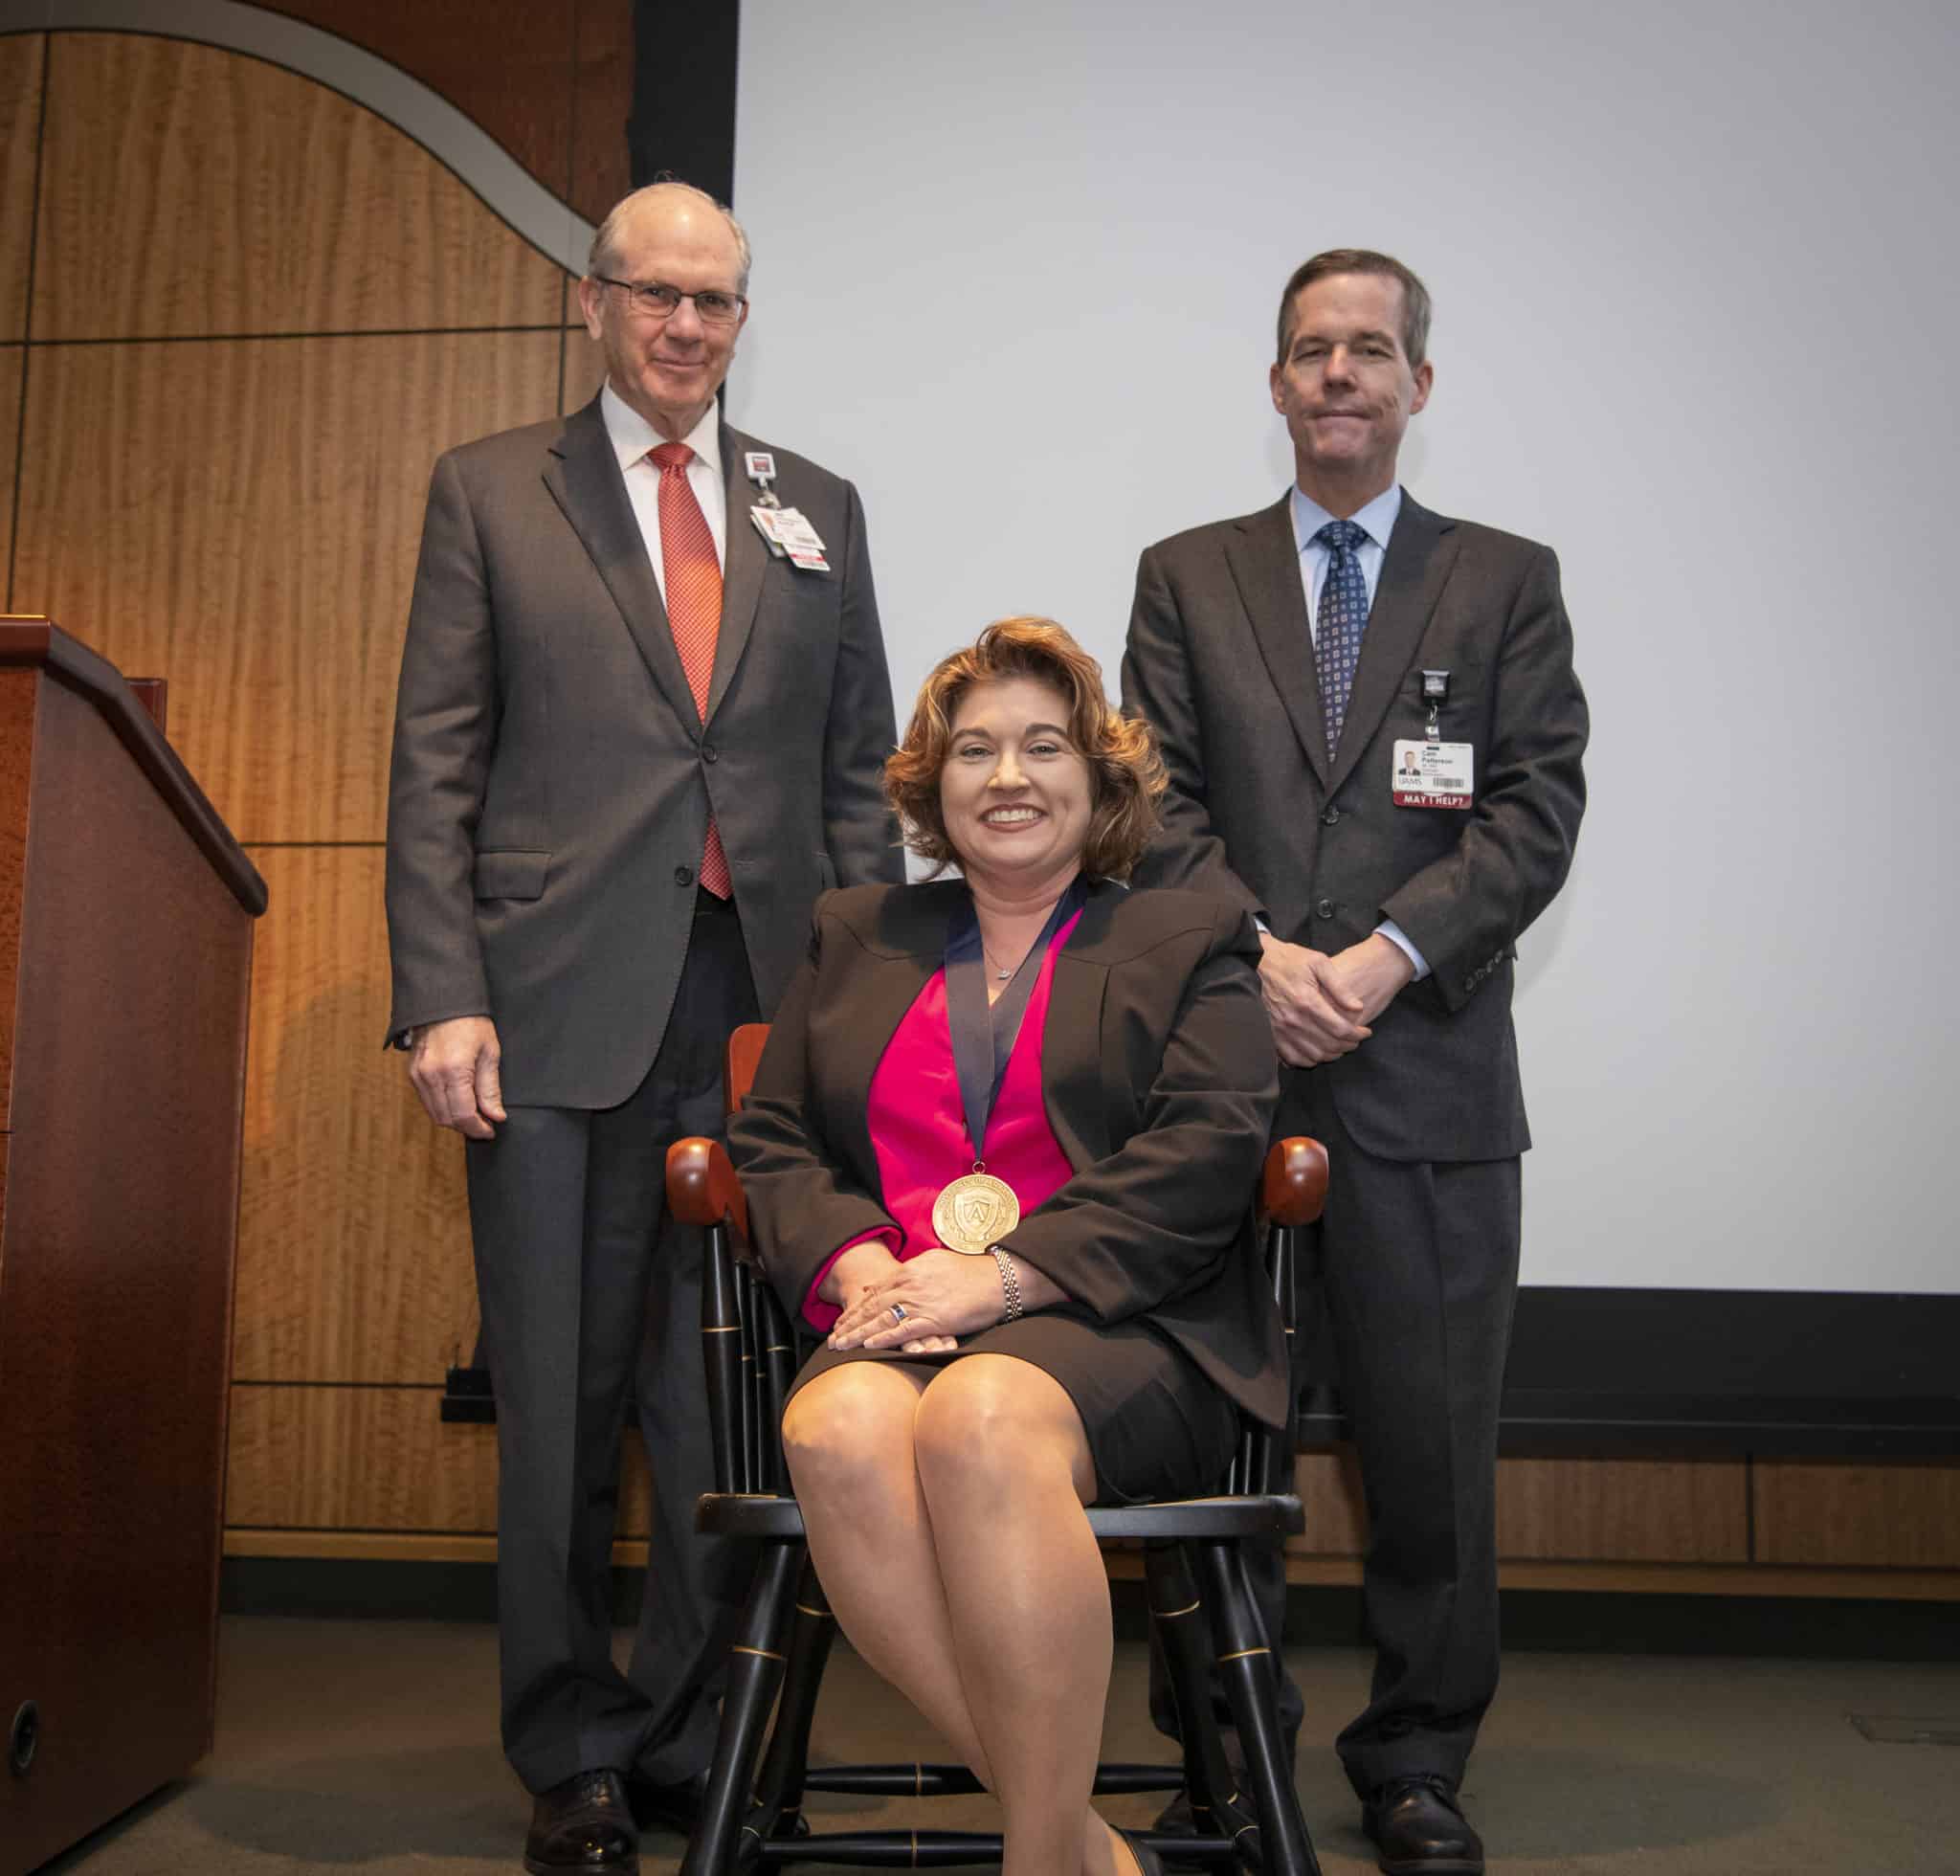 Overton-McCoy was presented with a commemorative medallion by UAMS Chancellor Cam Patterson, M.D., MBA and Christopher T. Westfall, M.D., executive vice chancellor and College of Medicine dean.